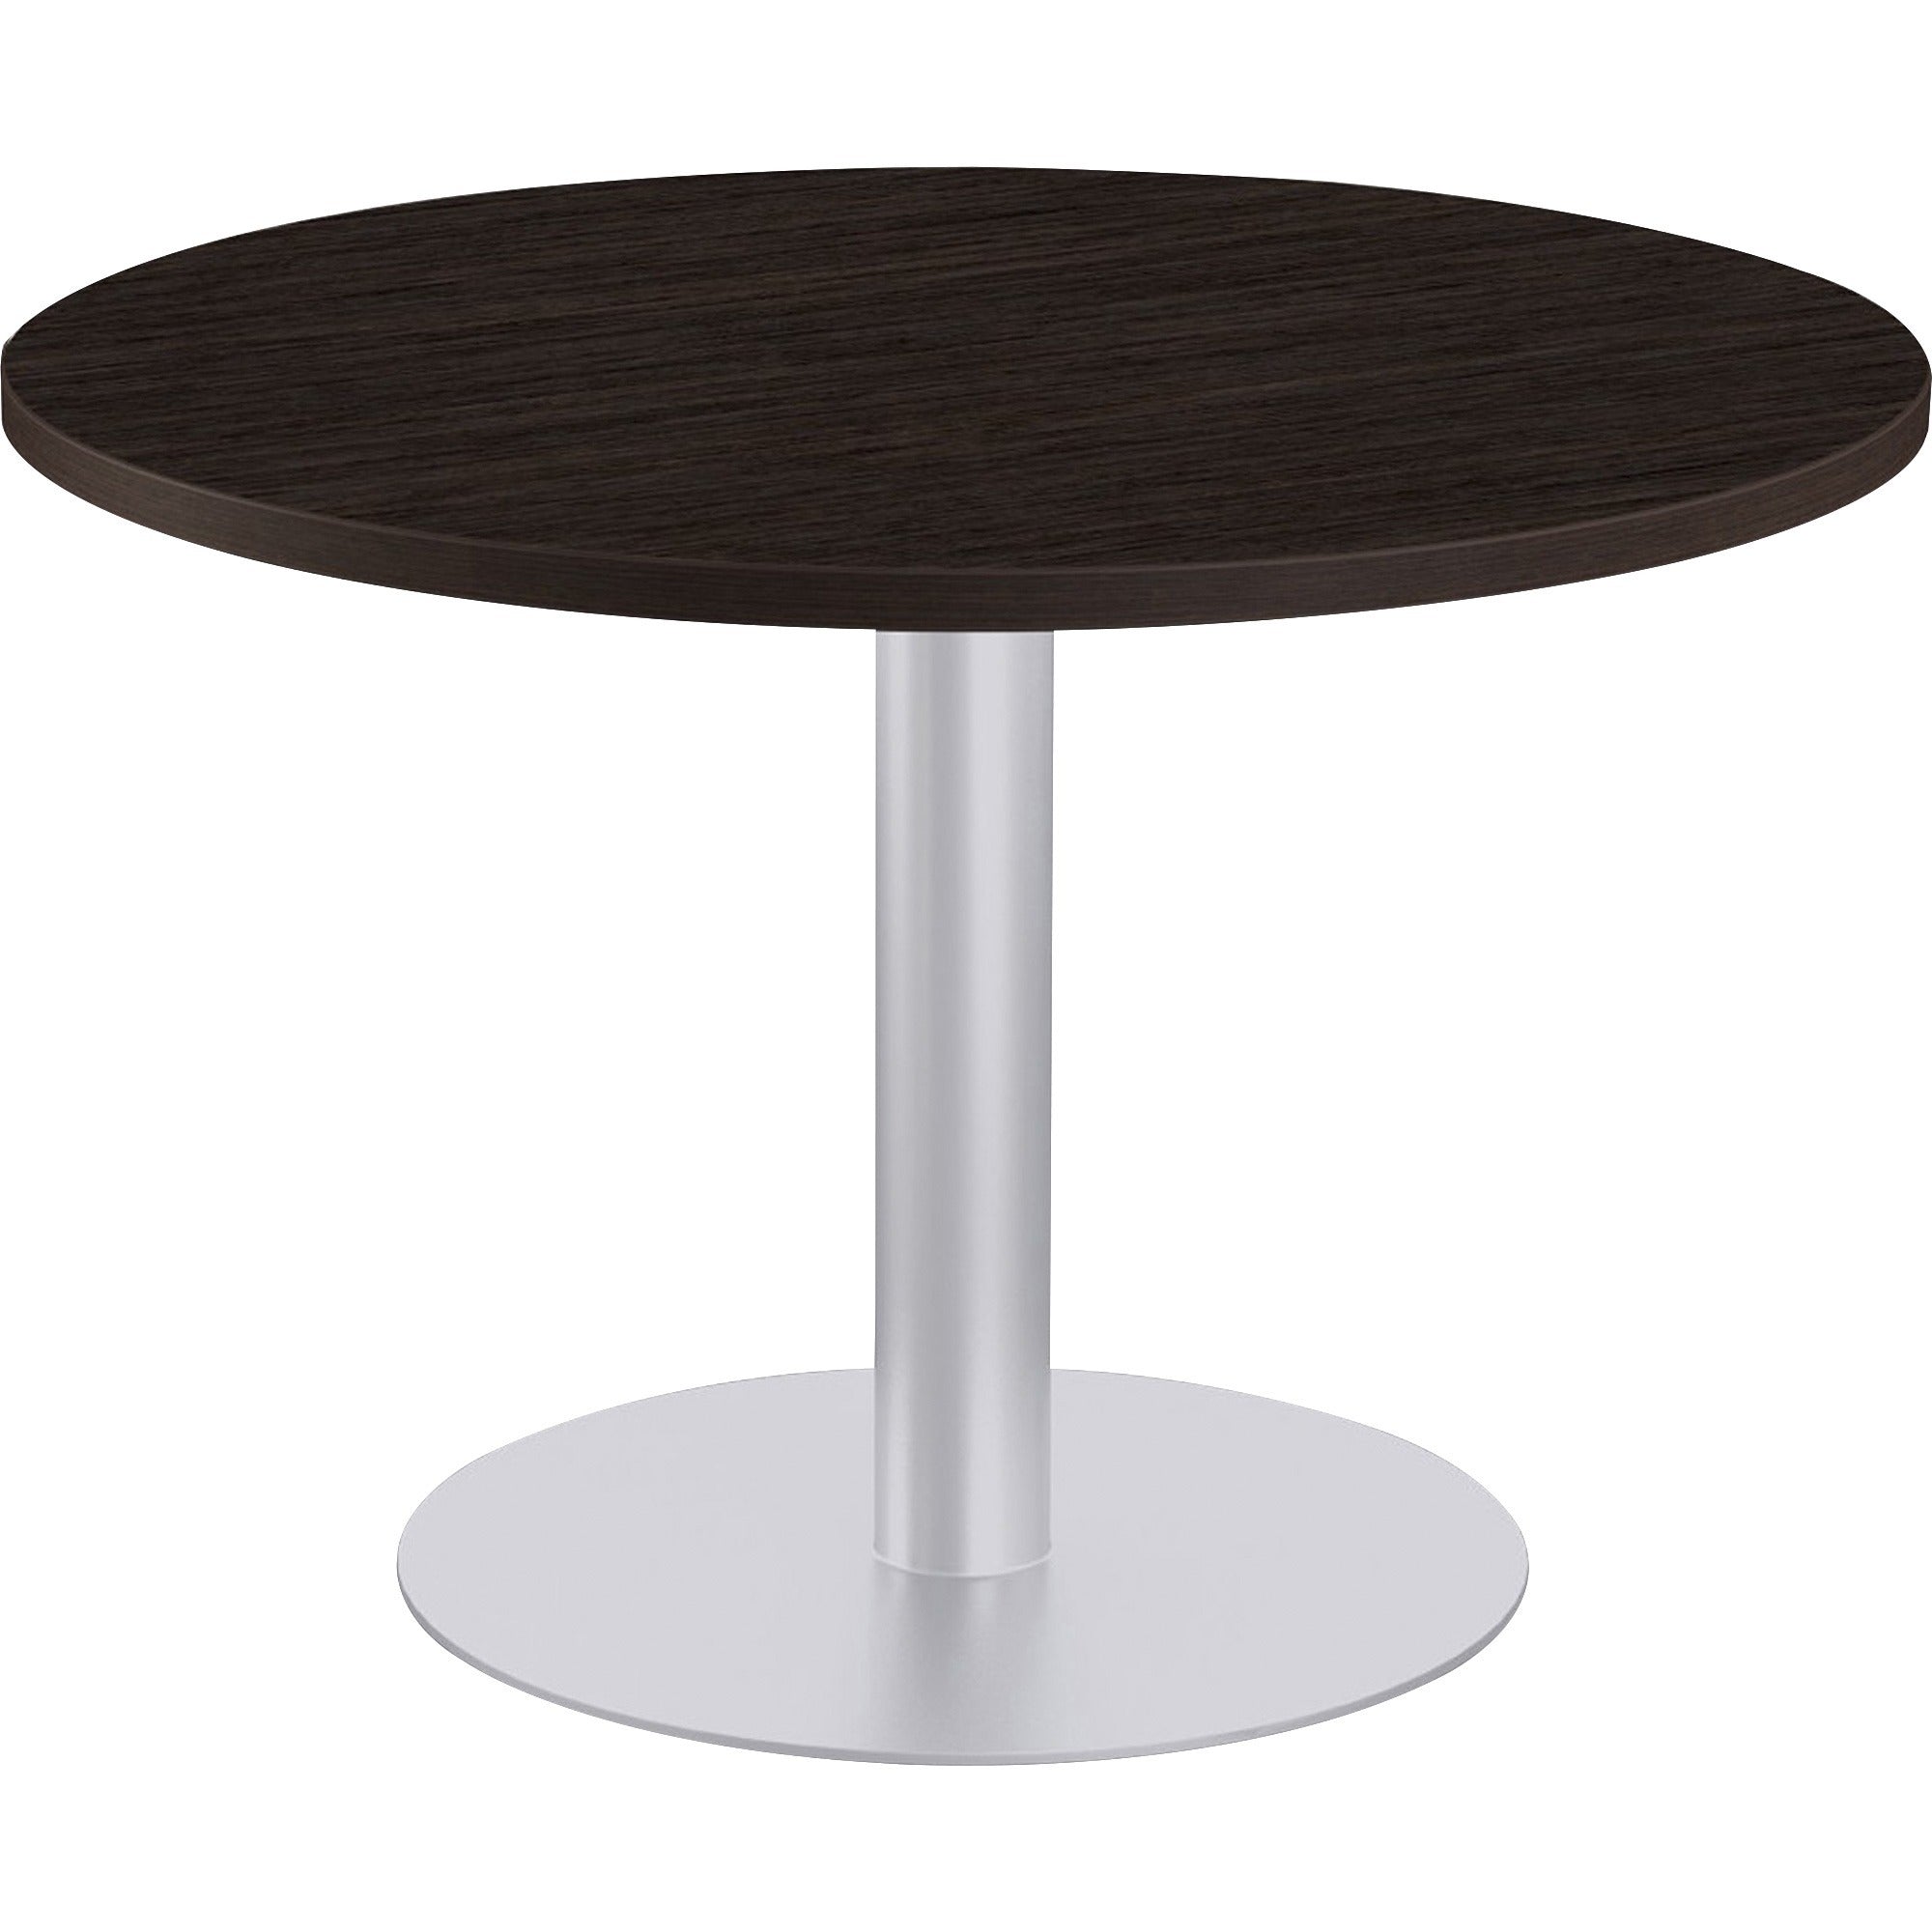 special-t-sienna-cafe-table-for-table-topbrown-round-top-powder-coated-metallic-silver-base-x-125-table-top-thickness-x-36-table-top-diameter-29-height-assembly-required-high-pressure-laminate-hpl-particleboard-top-material-1-ea_sctsien36er - 1